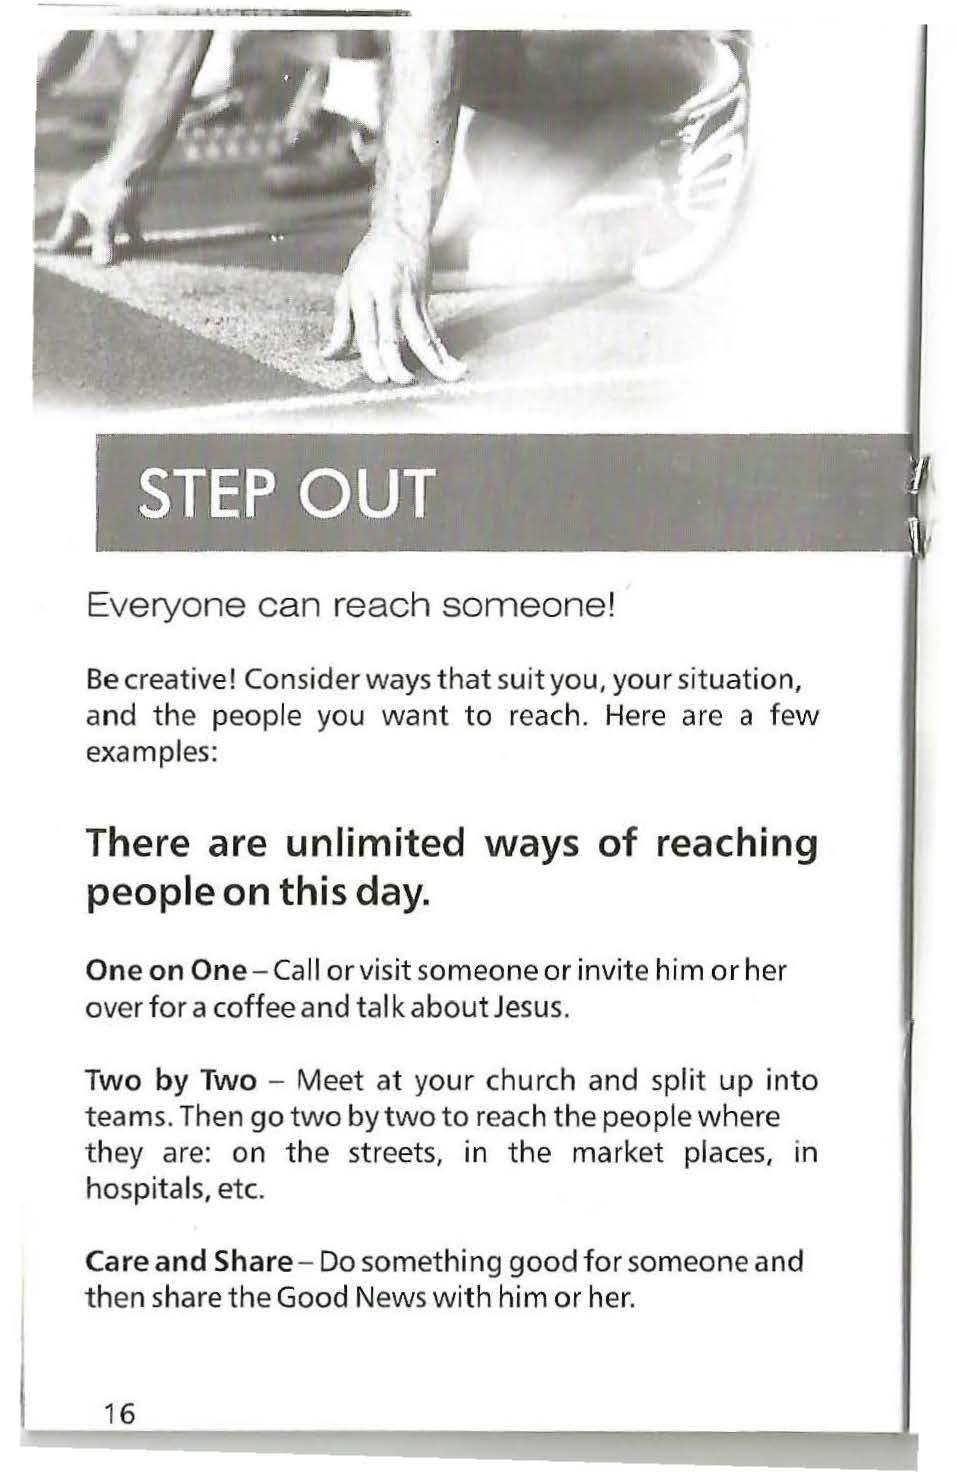 Everyone can reach someone! Be creative! Consider ways that suit you, your situation, and t he people you want to reach.